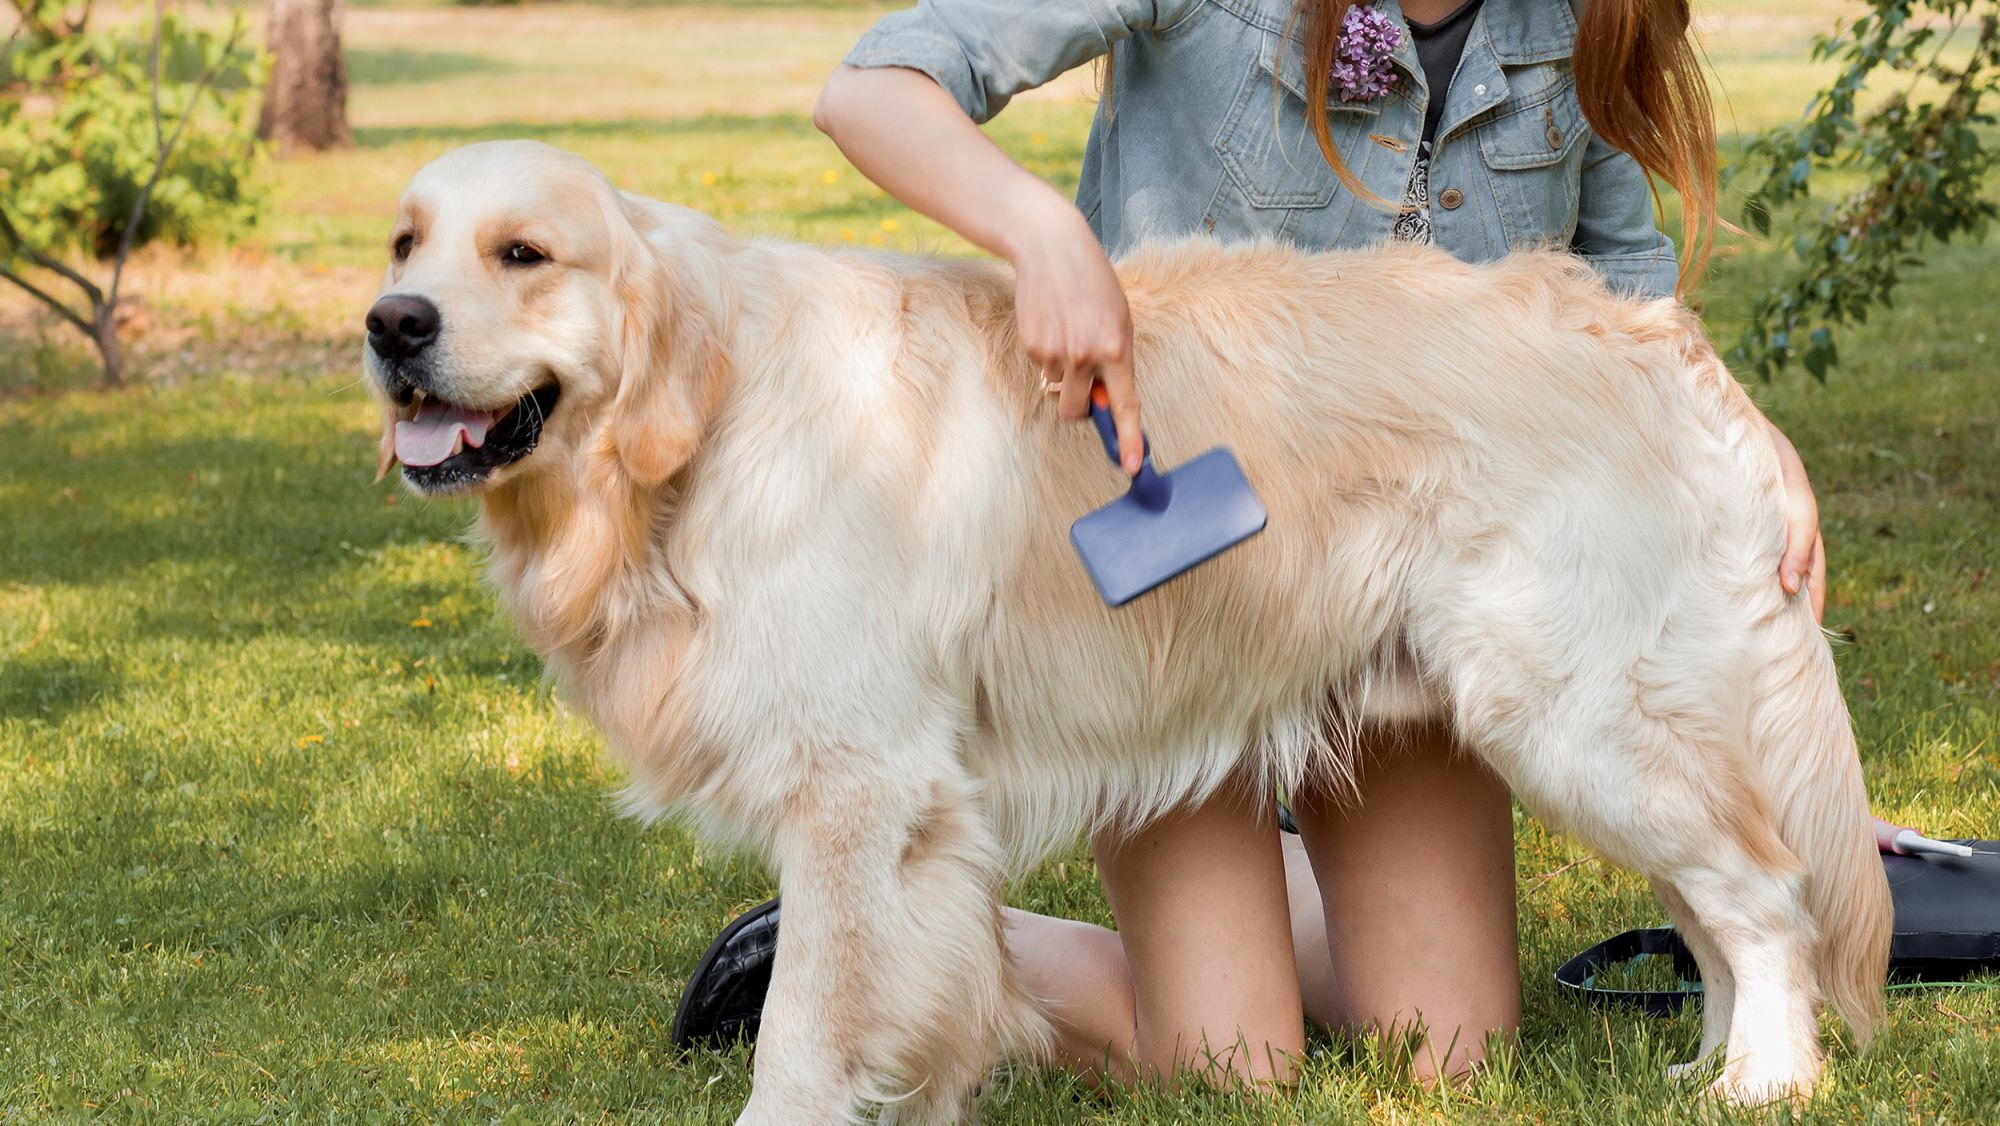 Golden Retriever standing outside being brushed by female owner.